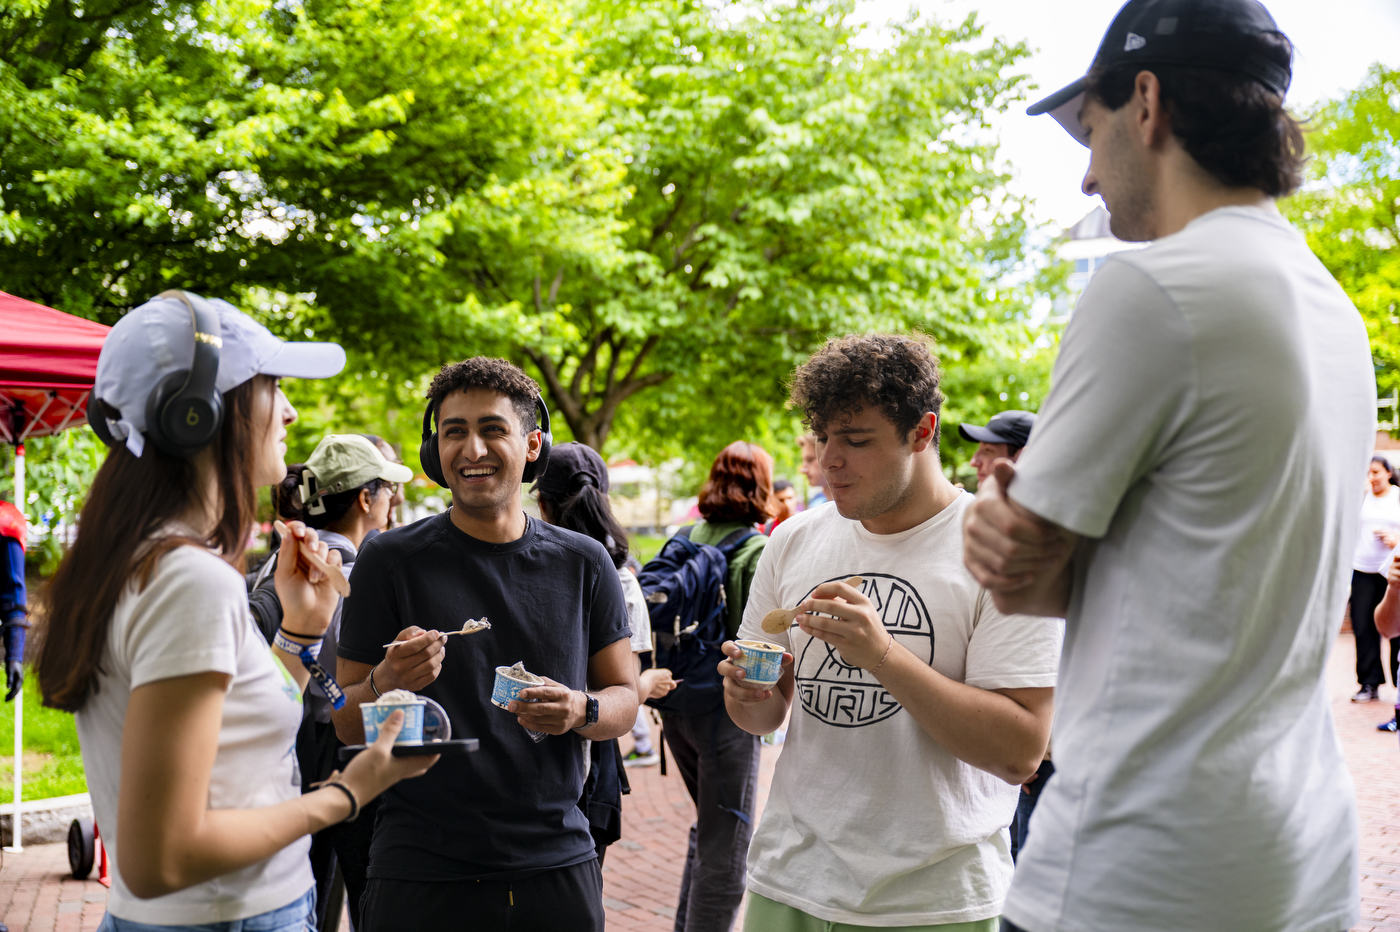 Four people stand in a circle, laughing while enjoying ice cream.